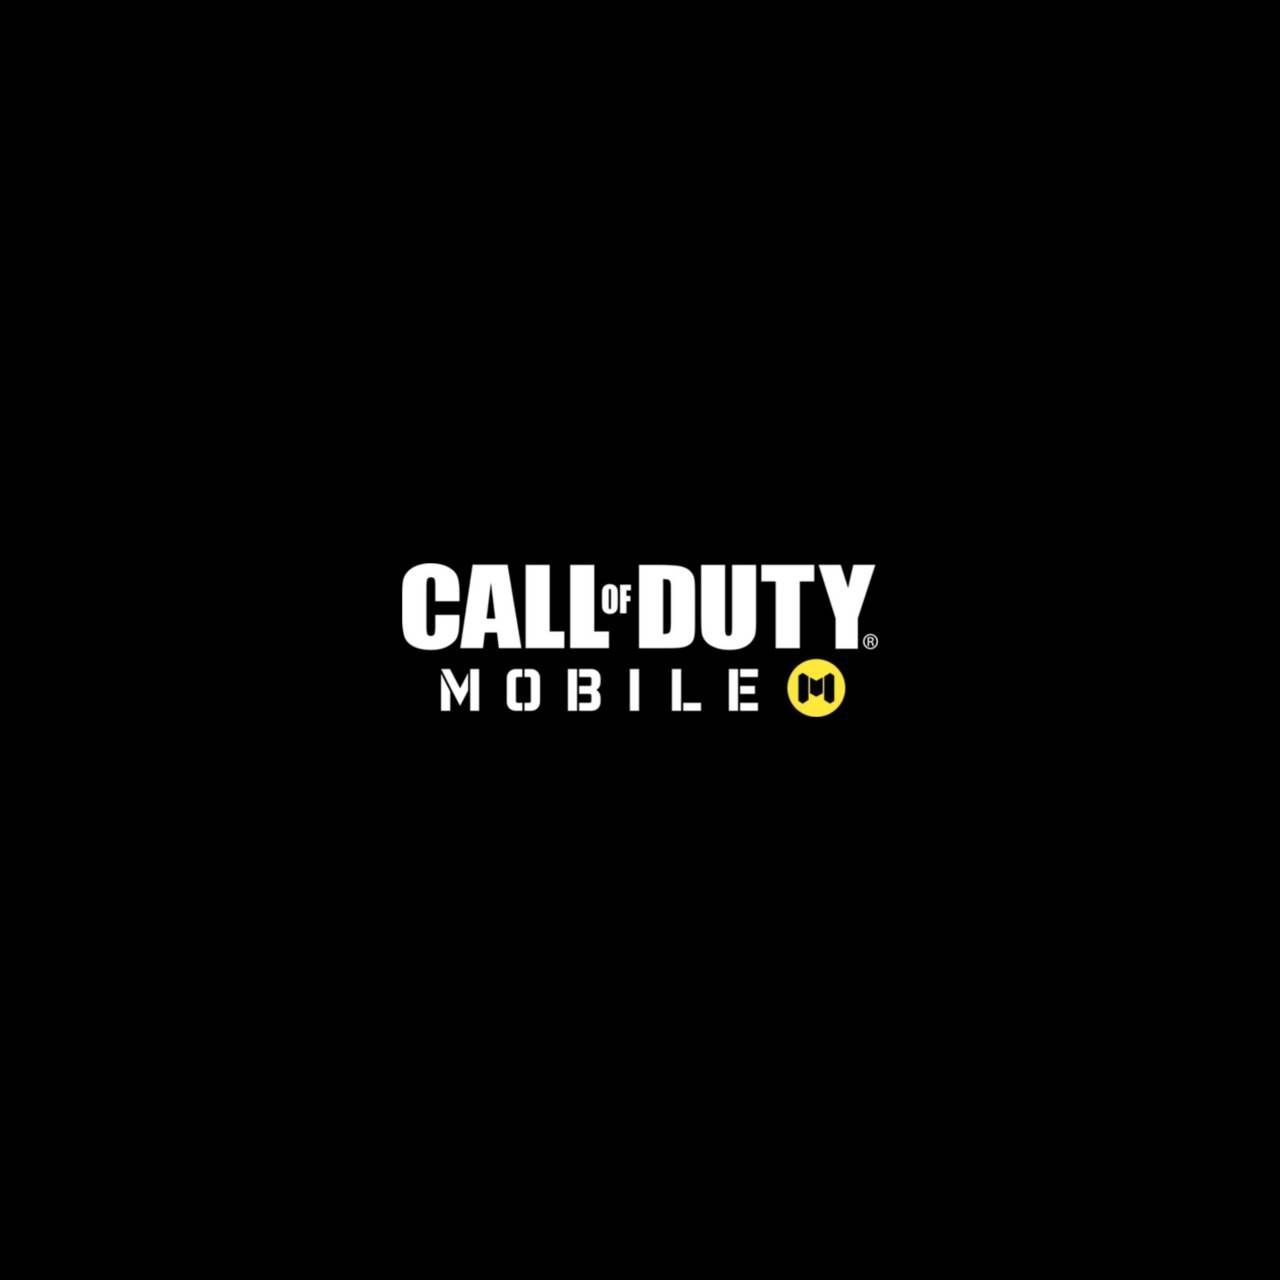 Call of Duty Mobile Logo Wallpaper Free Call of Duty Mobile